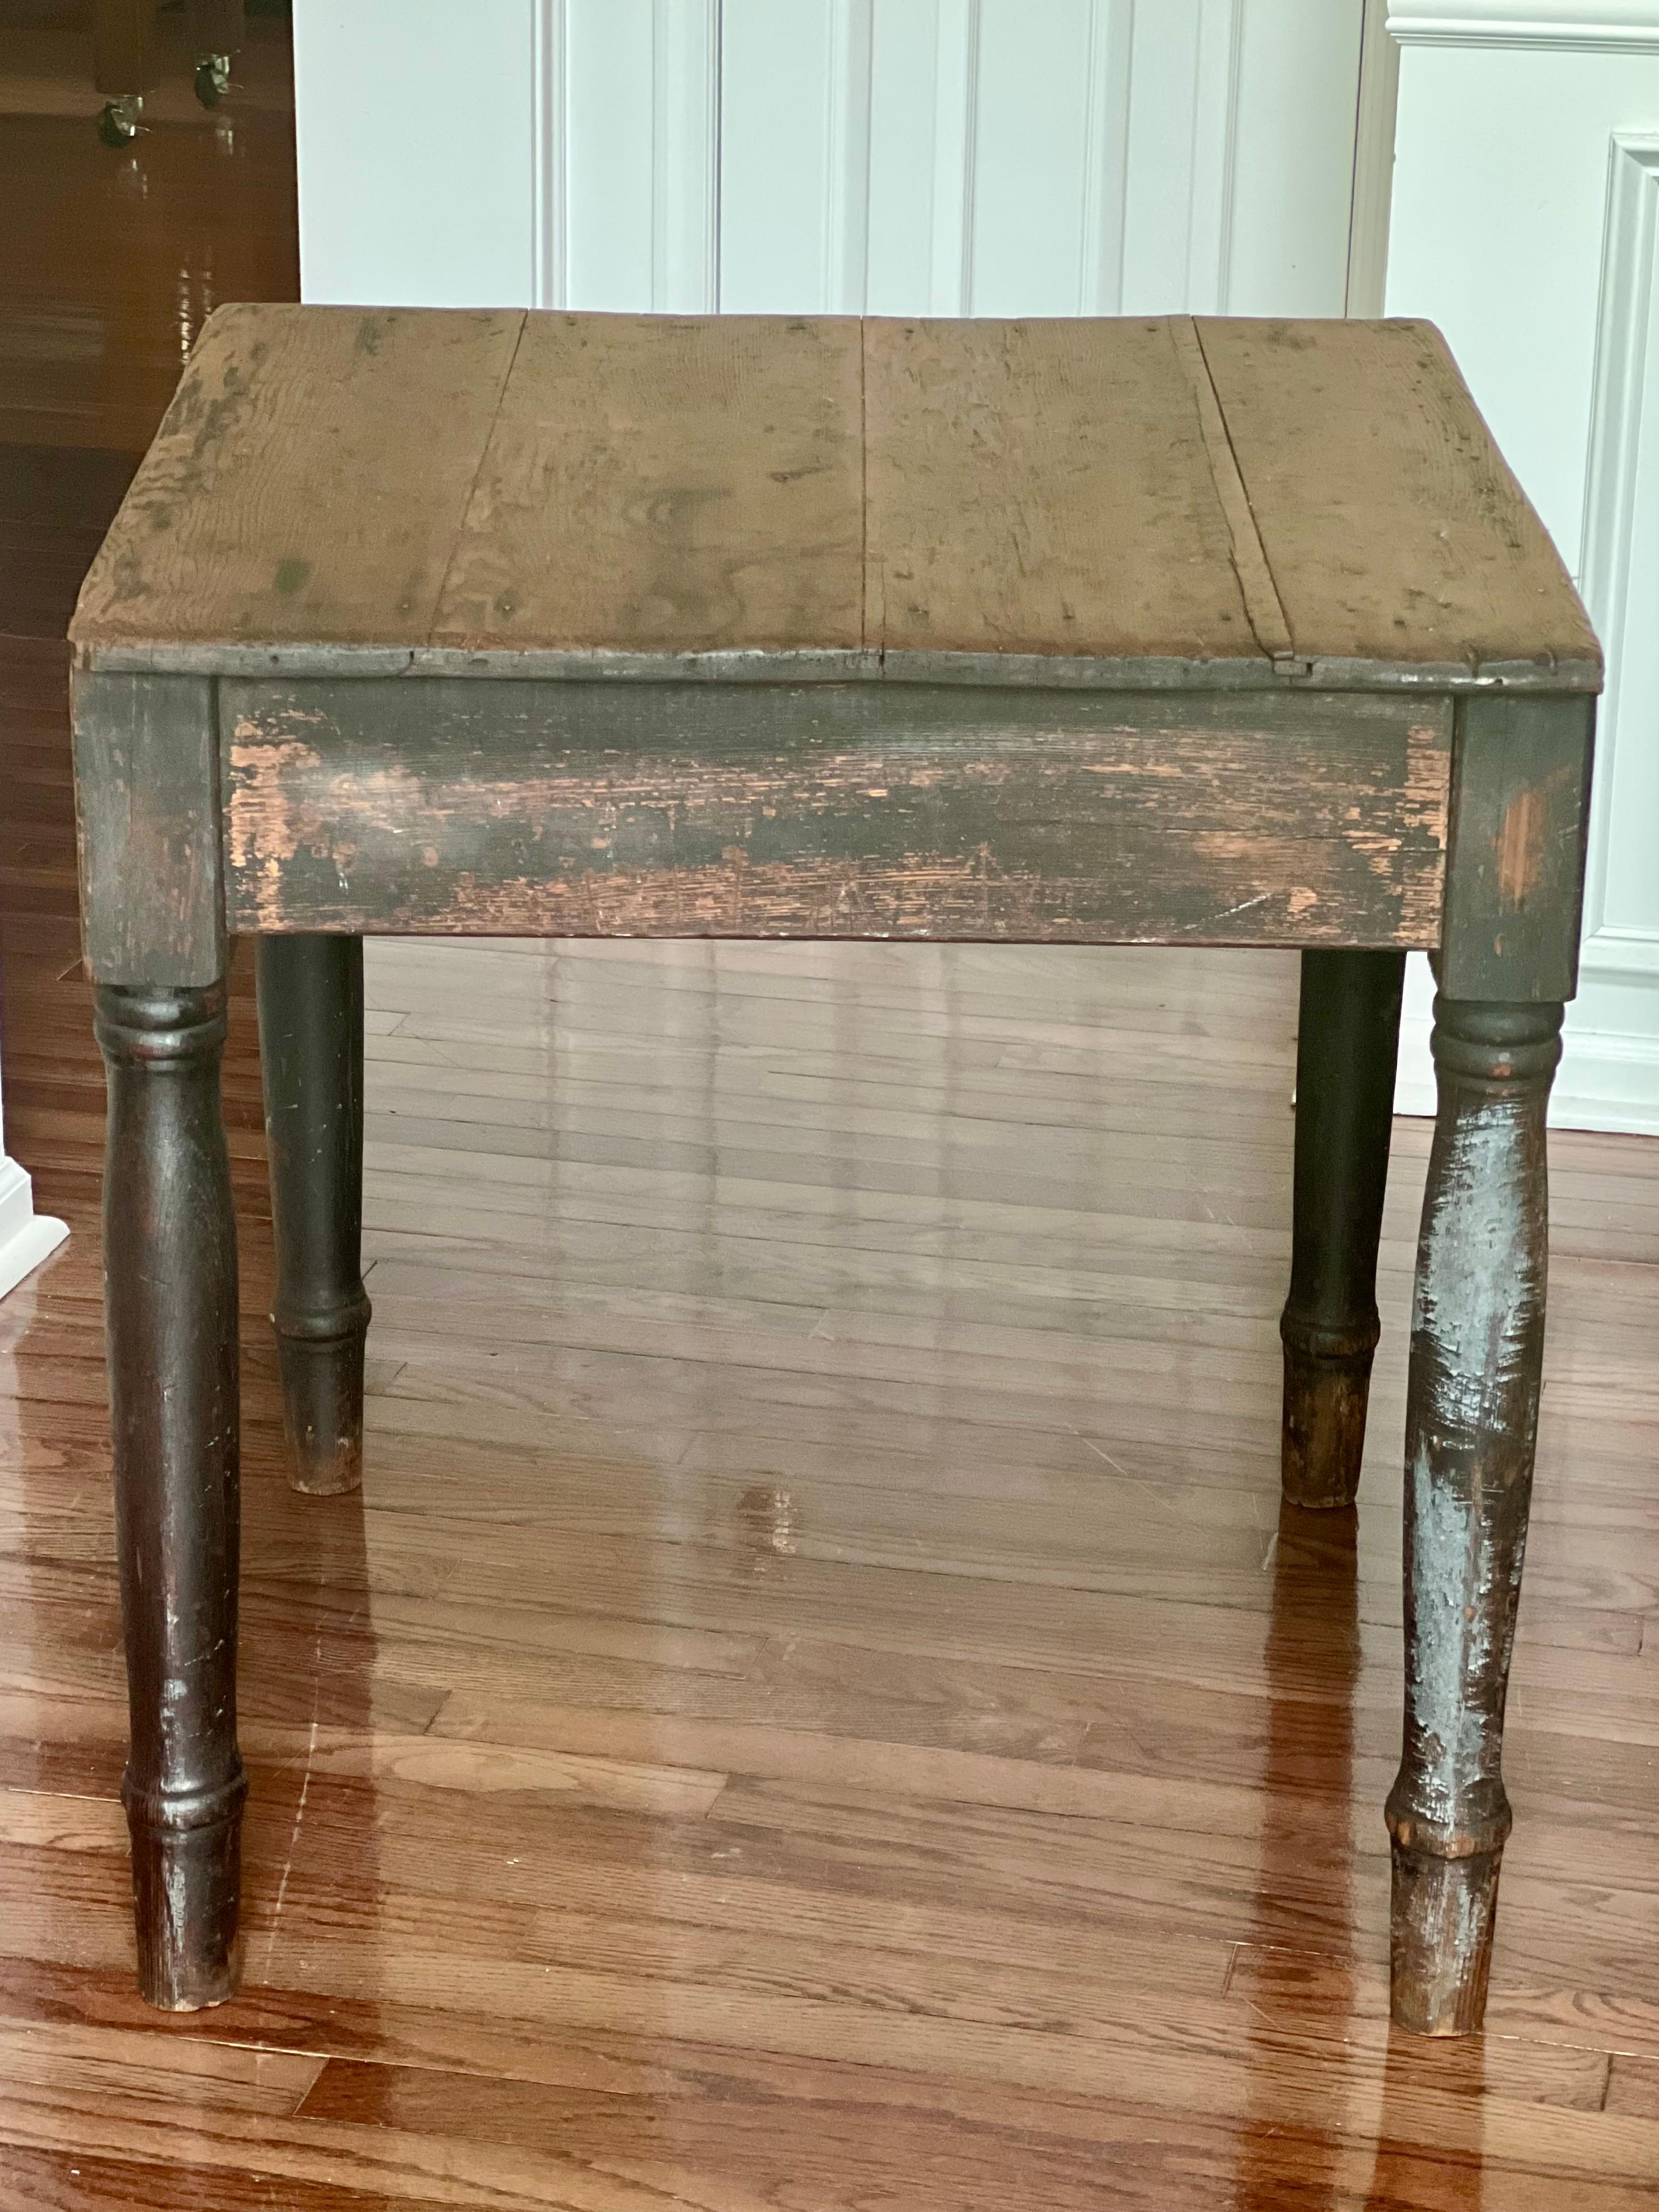 Antique Rustic Black Painted Farmhouse Harvest Work Table In Good Condition For Sale In Doylestown, PA